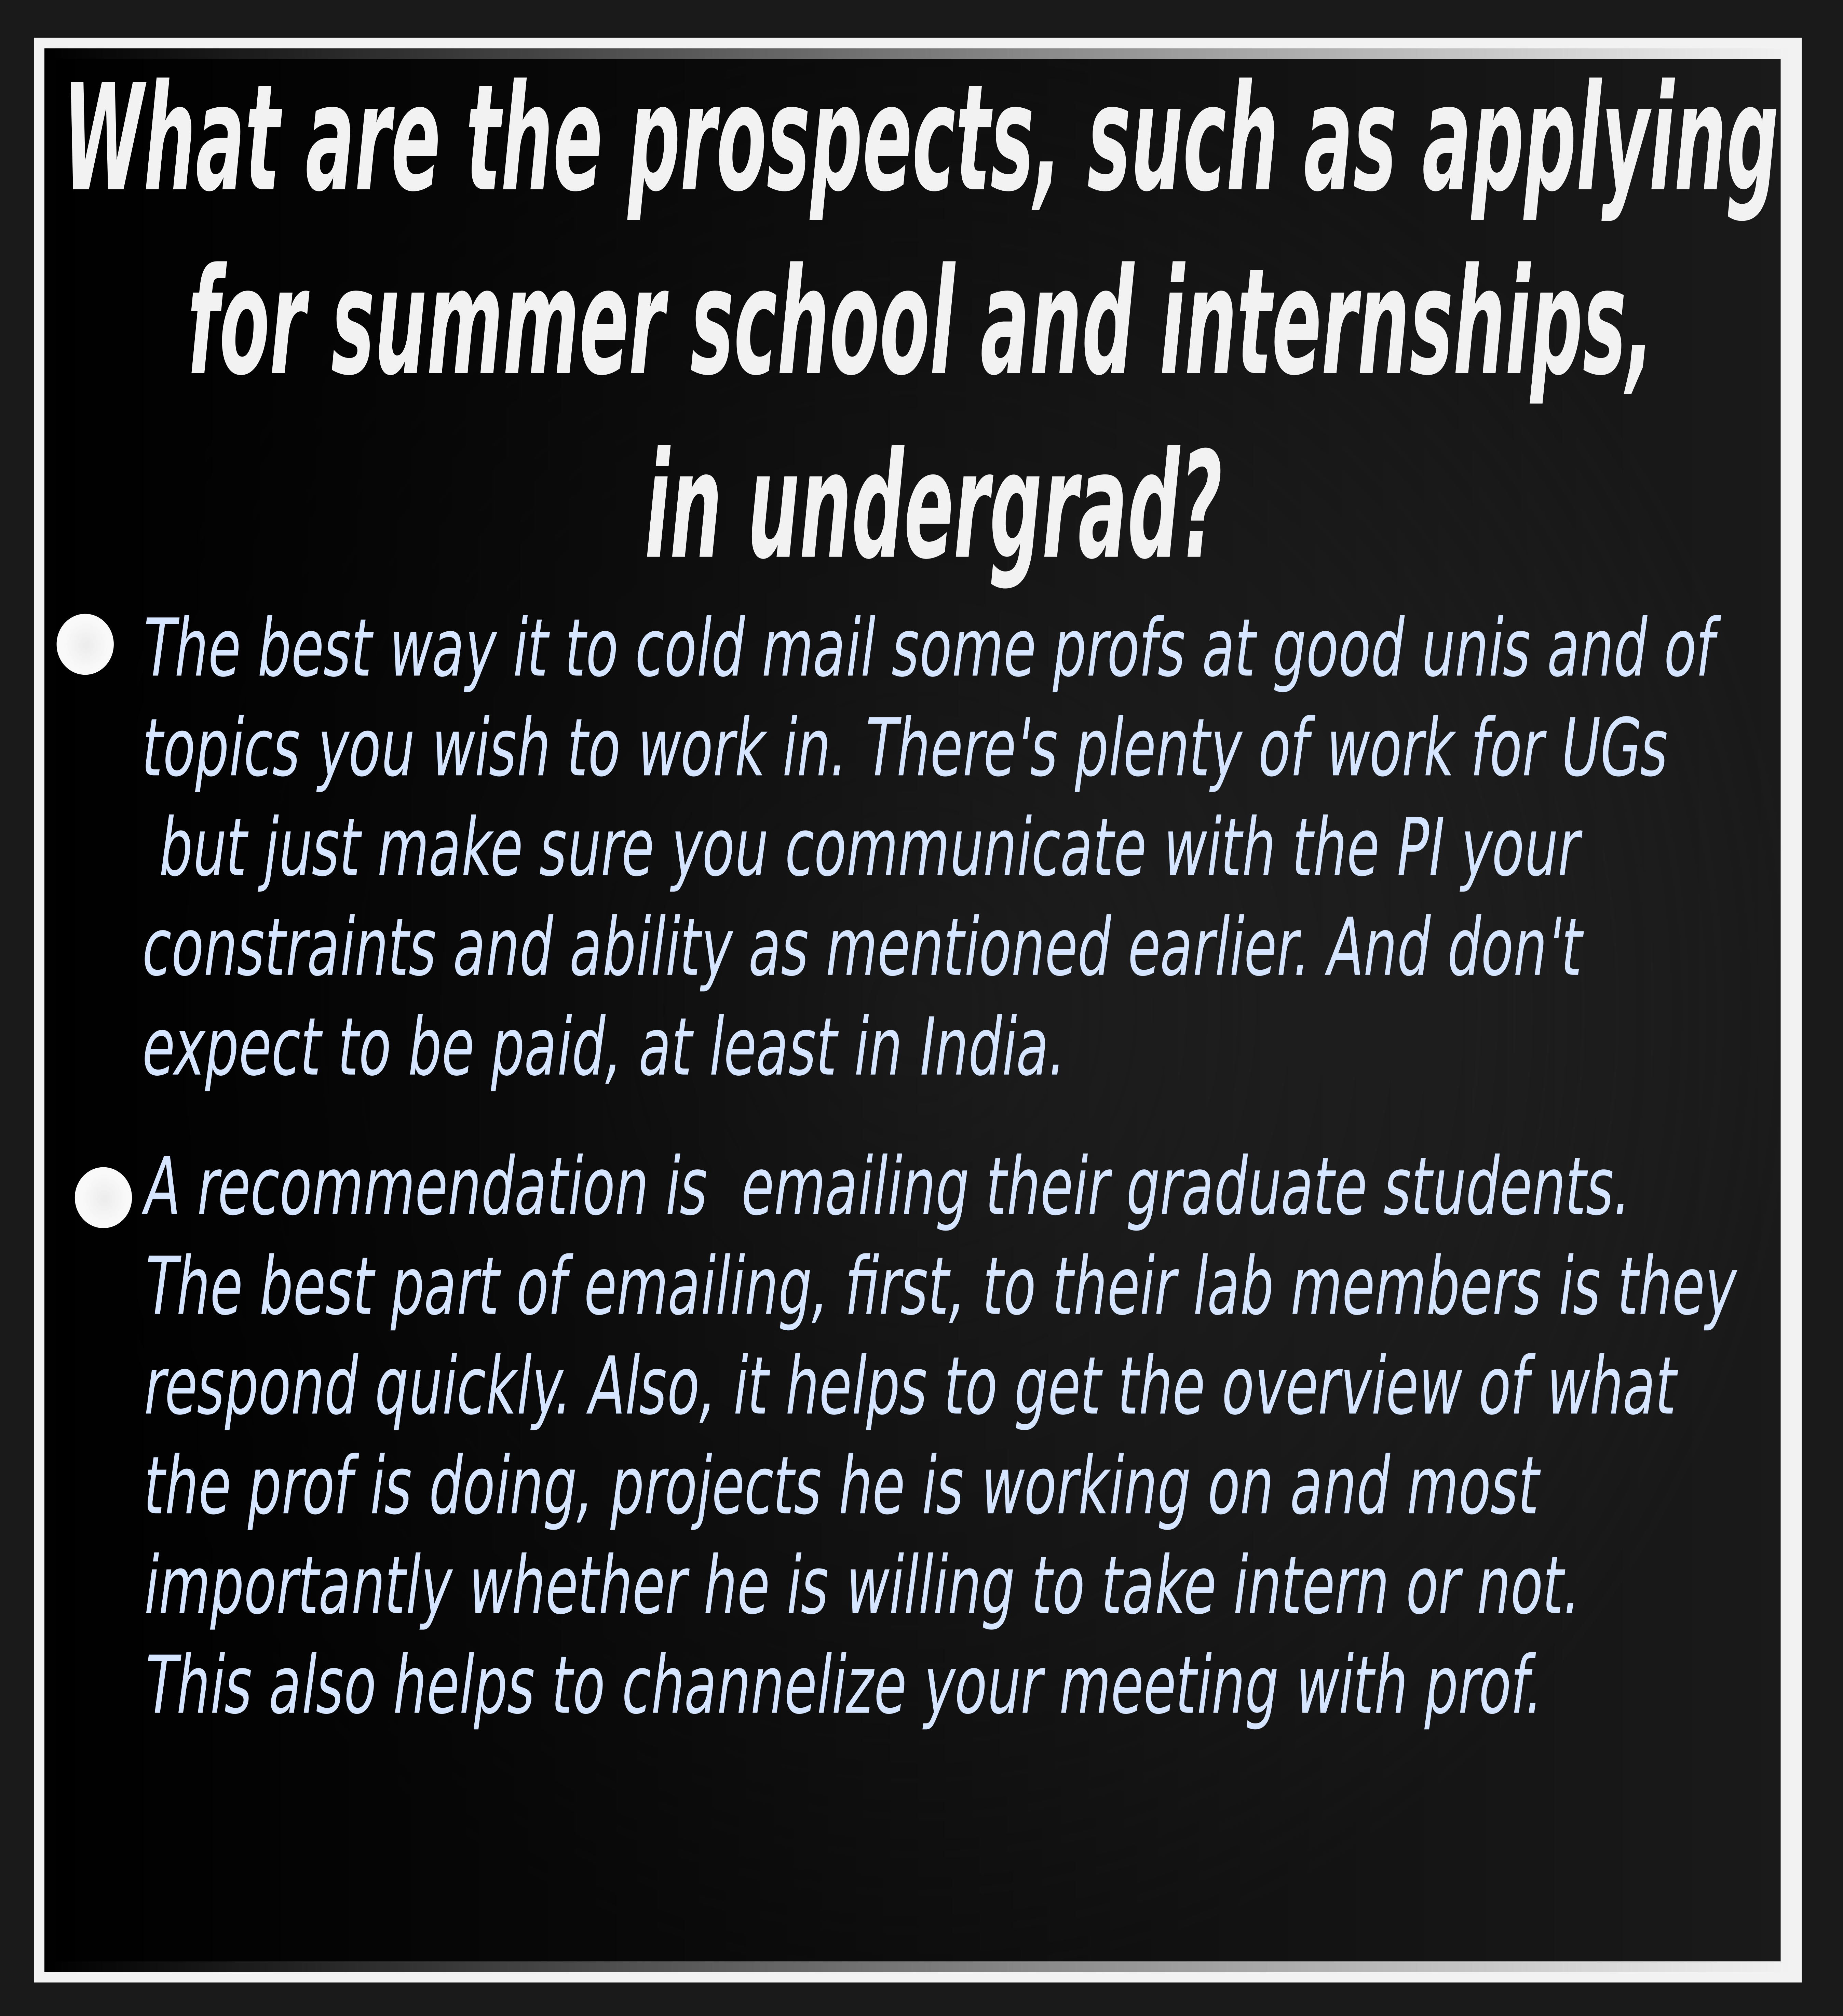 What are the prospects, such as applying for summer school and internships, in undergrad?